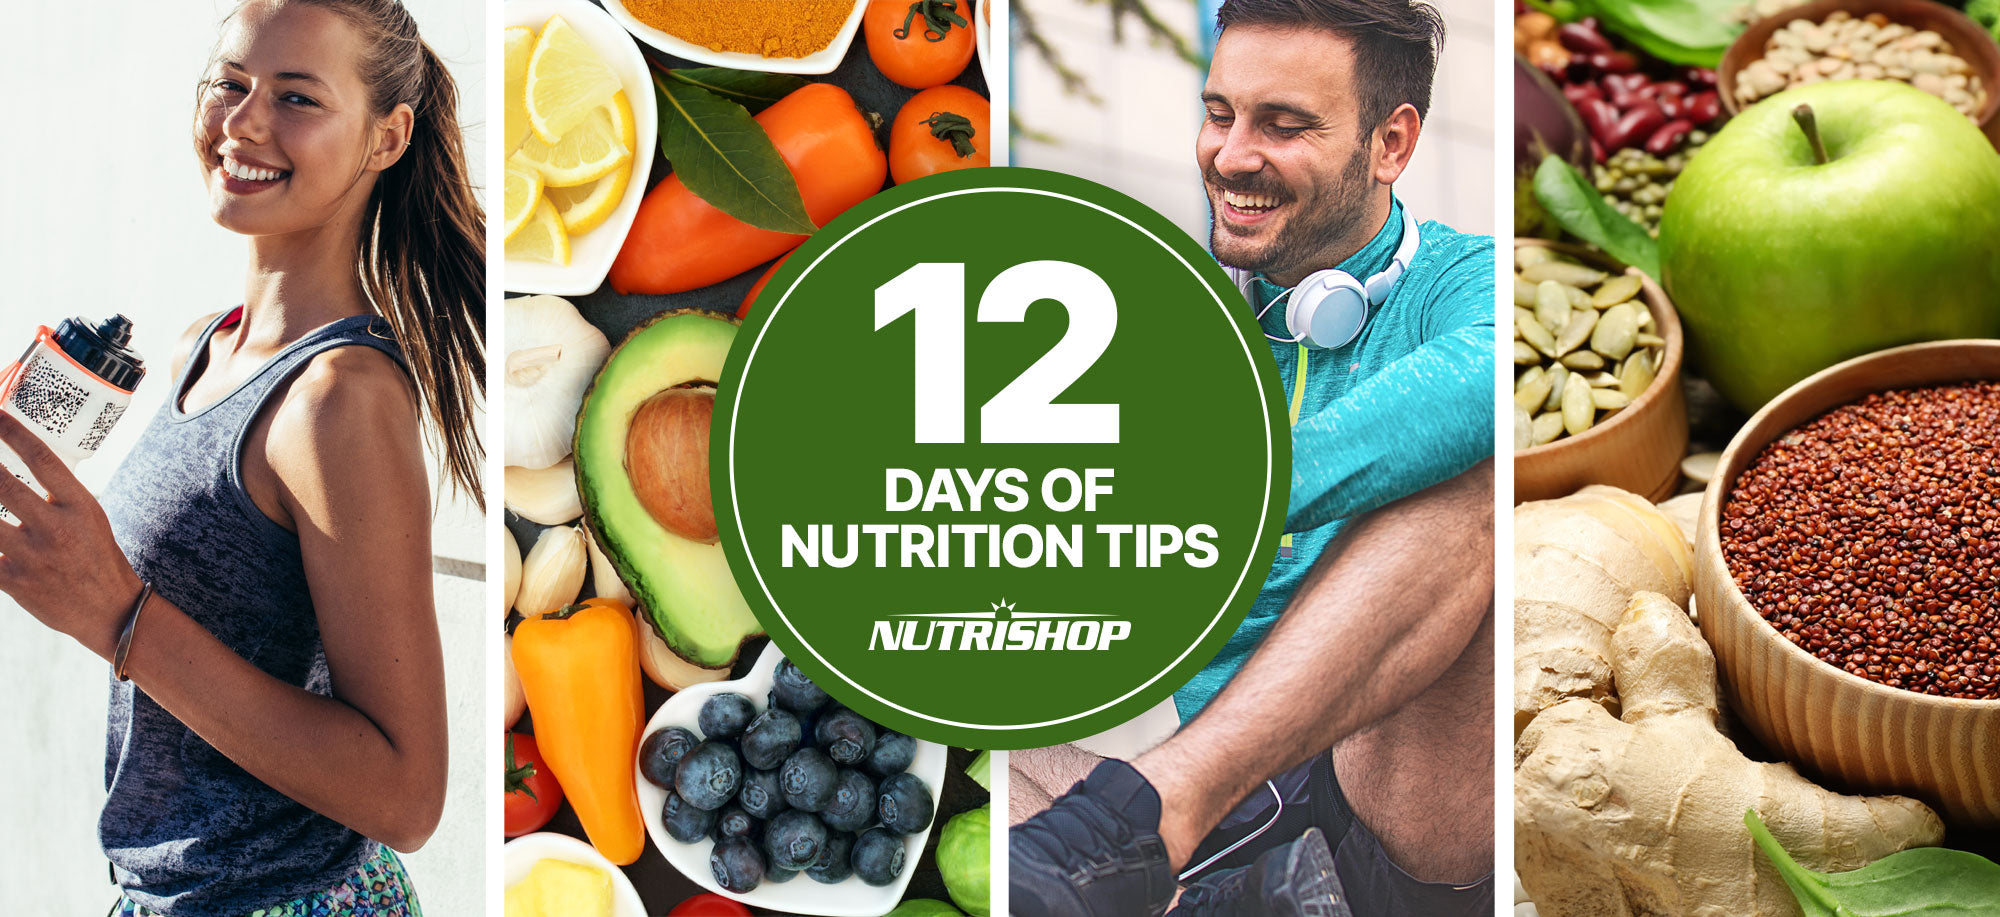 NUTRISHOP® Offers 12 Days of Nutrition Tips